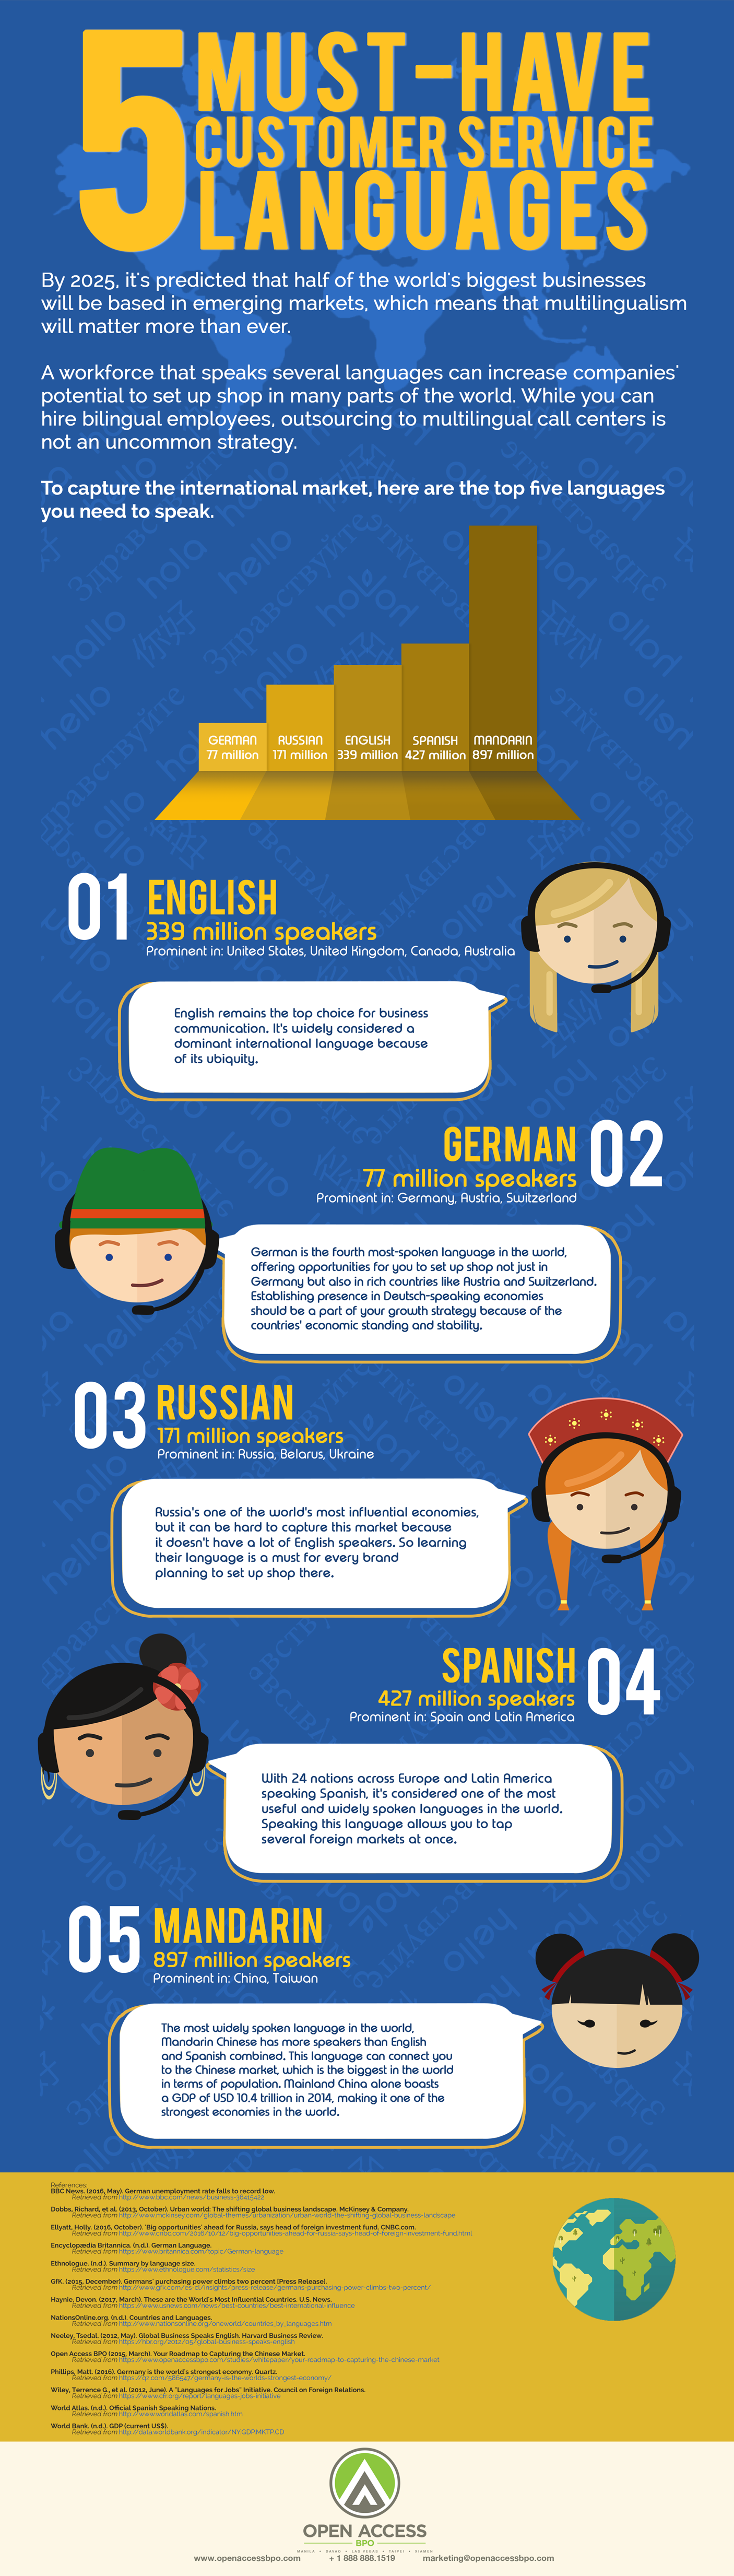 5 Must-have Customer Service Languages infographic